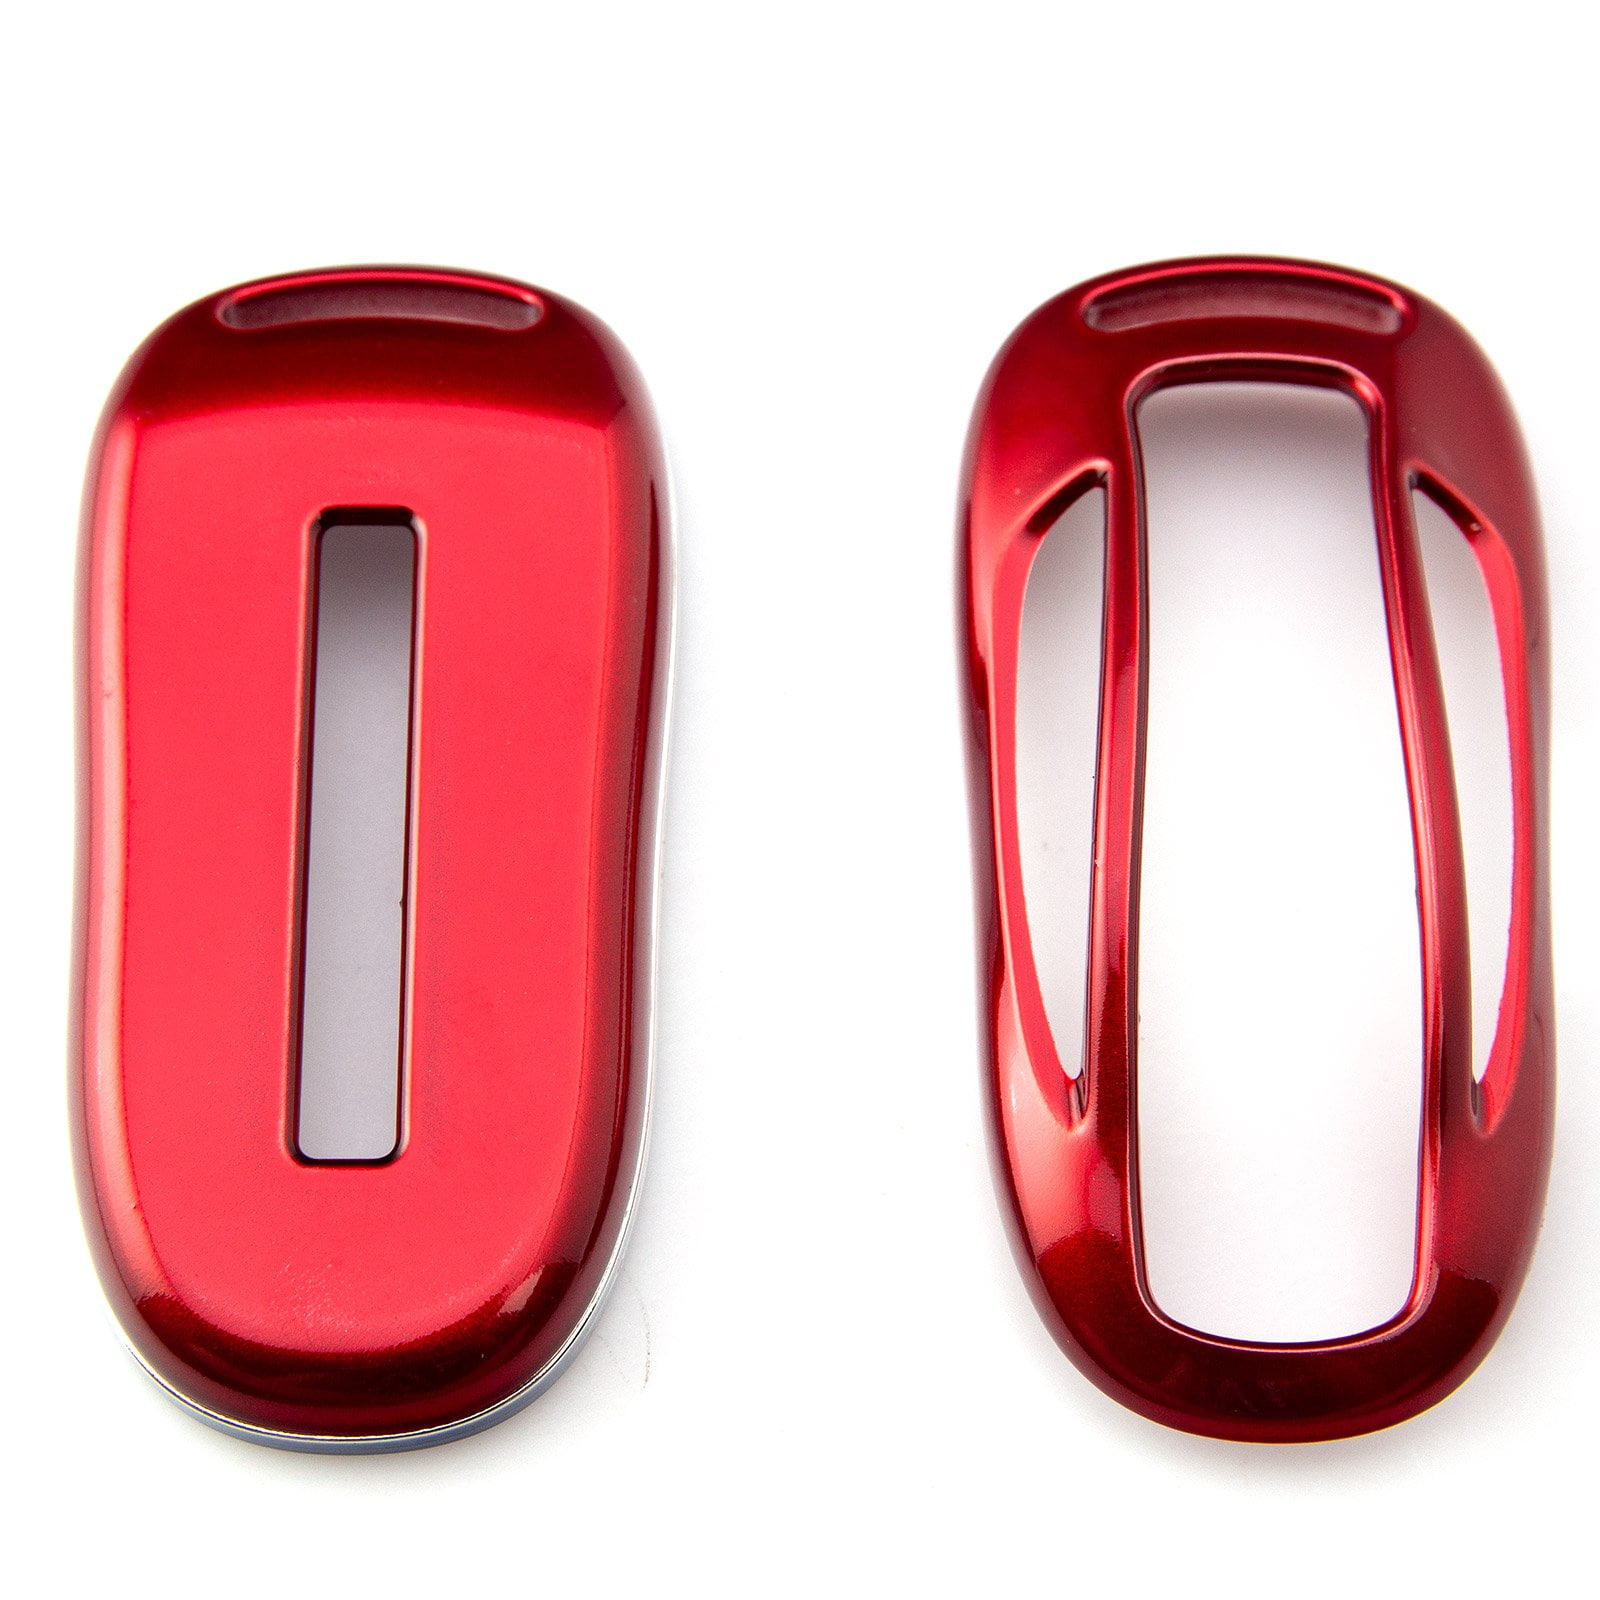 Color Match Your Tesla Key Fob with this Replacement Shell Cover